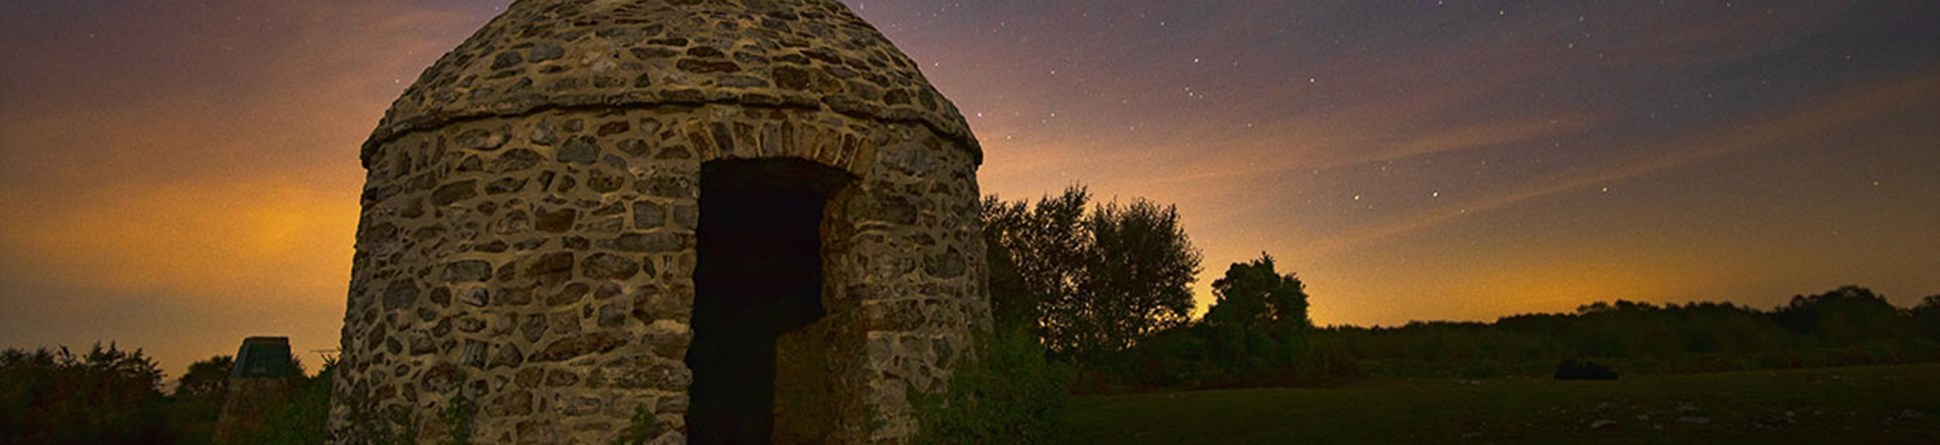 Alt text: A beehive shaped stone building photographed against a starry night sky.